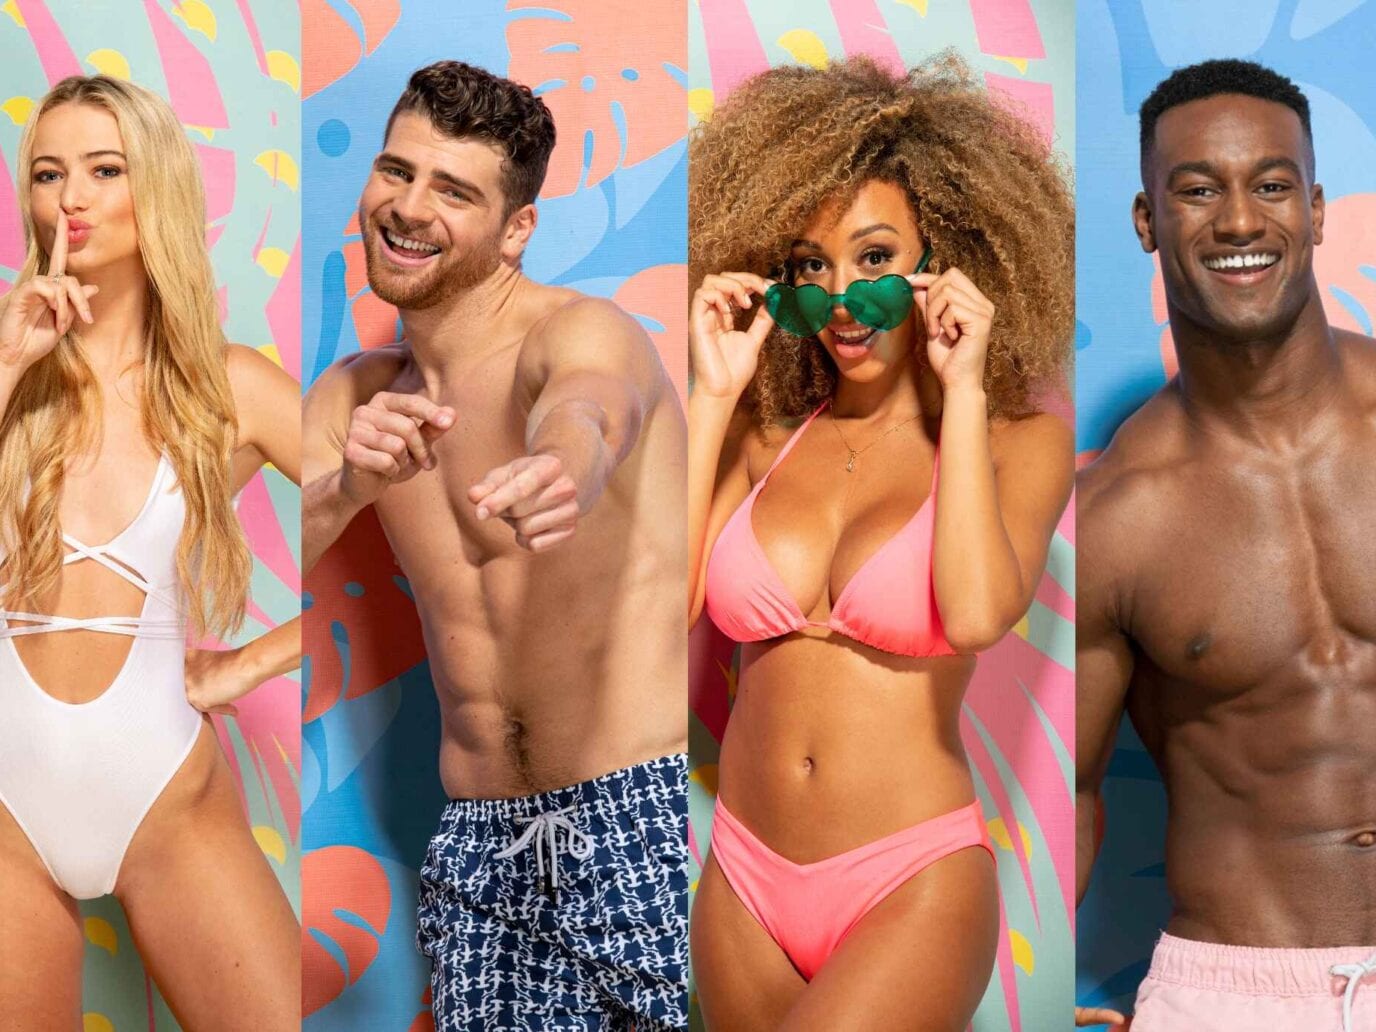 Where are they now? Catch up with 'Love Island USA' season 2